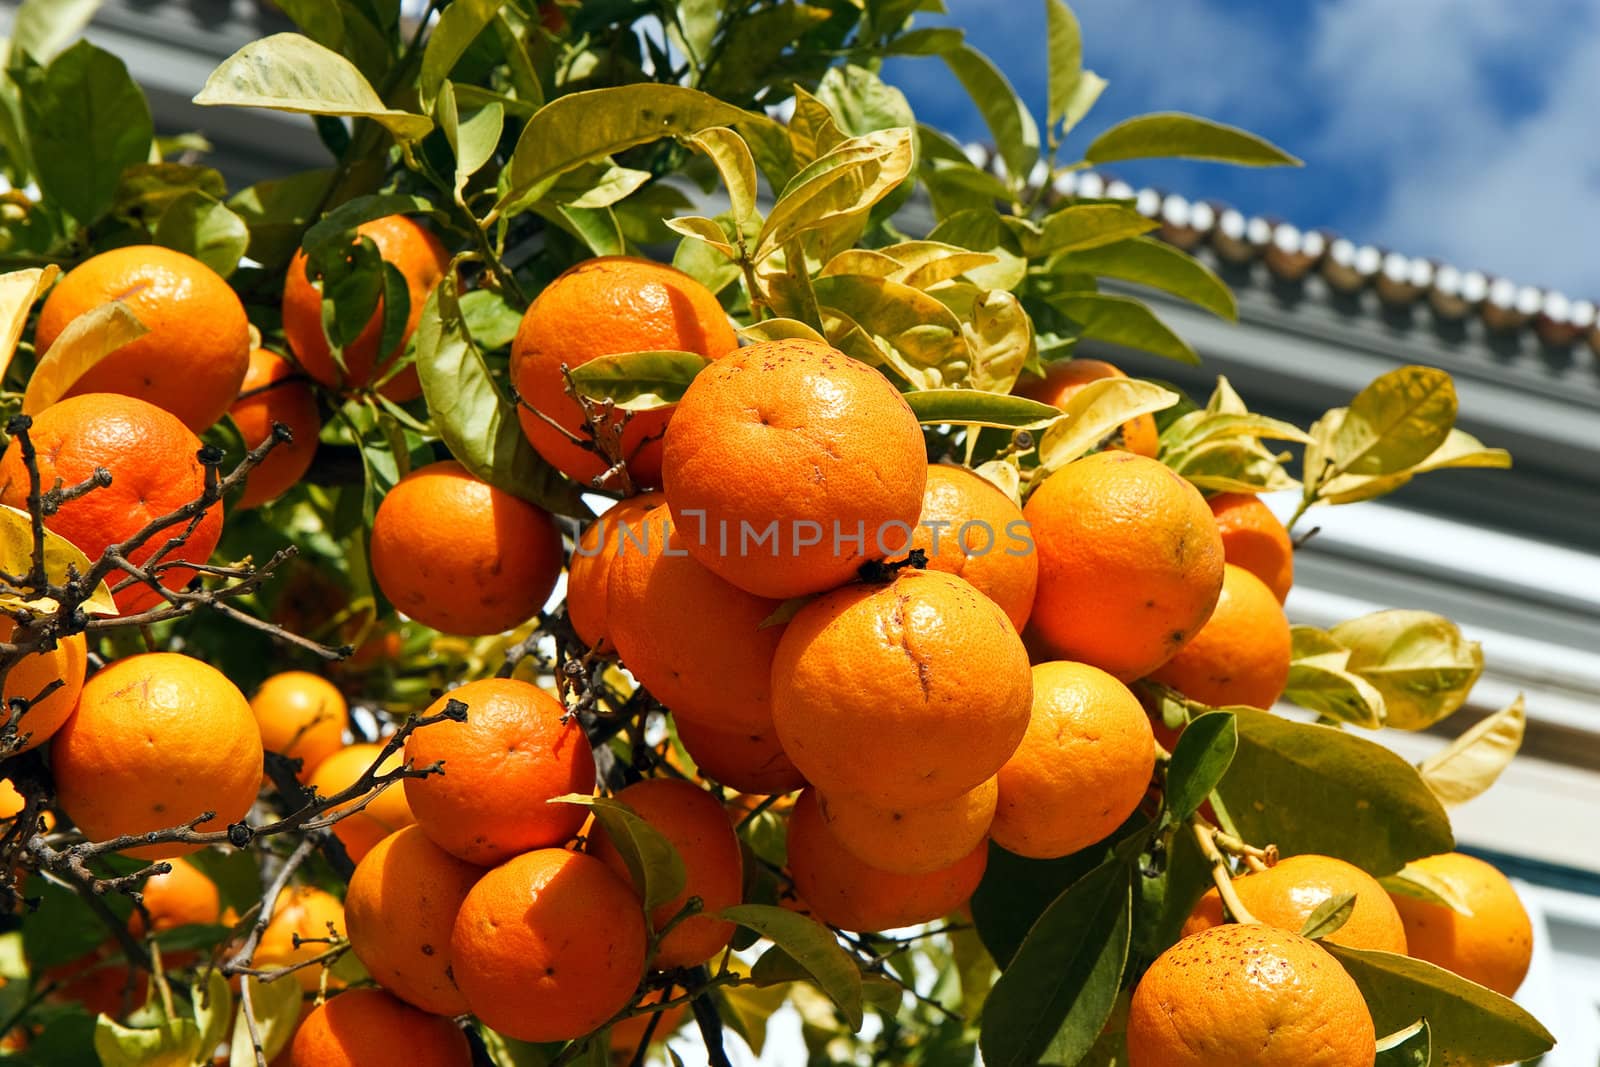 mandarin oranges on the tree with green leaves